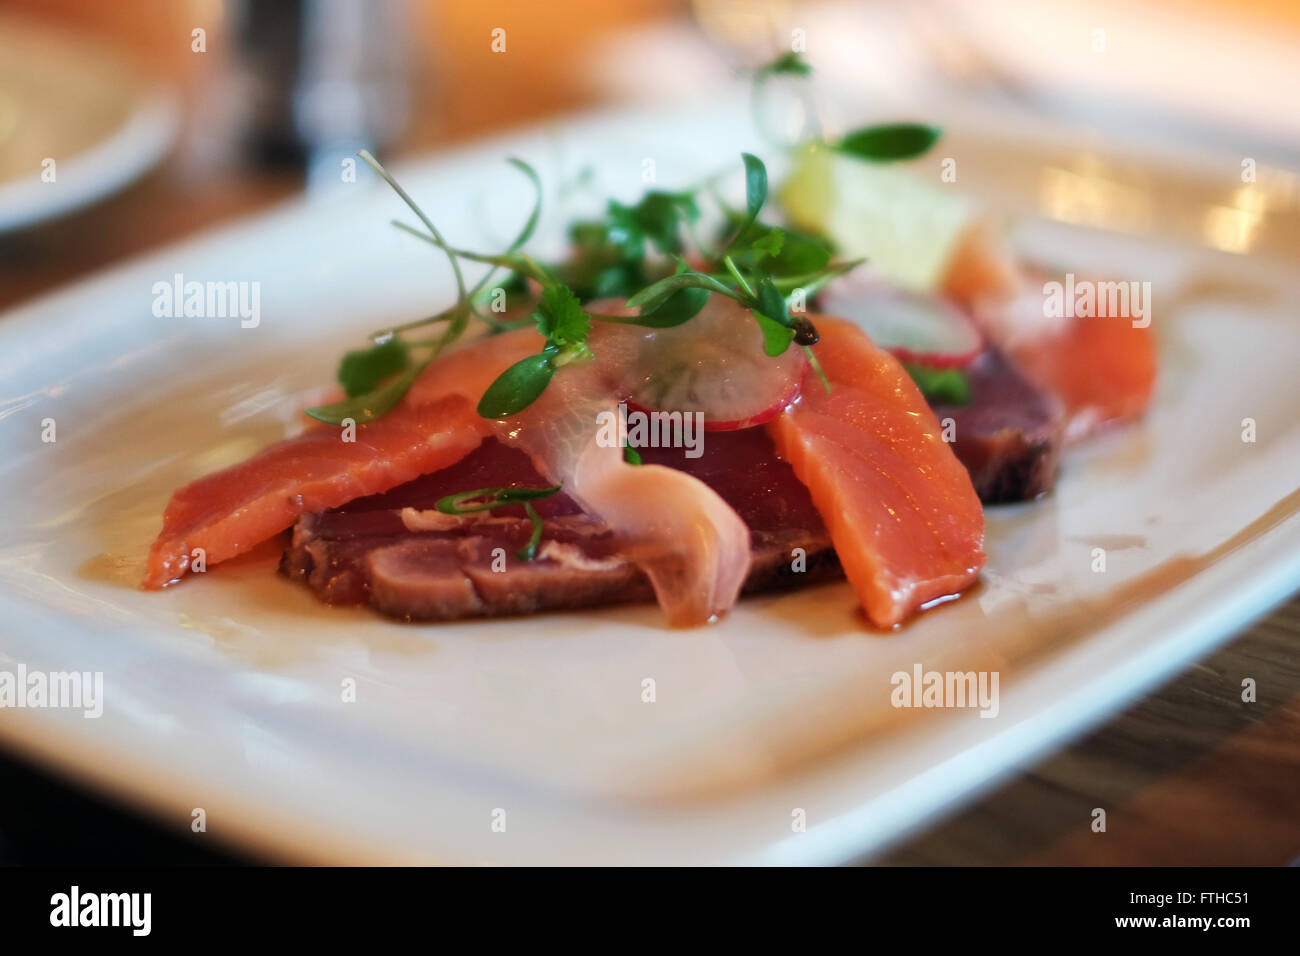 Close up view of seared tuna and salmon, in an english restaurant setting. Stock Photo